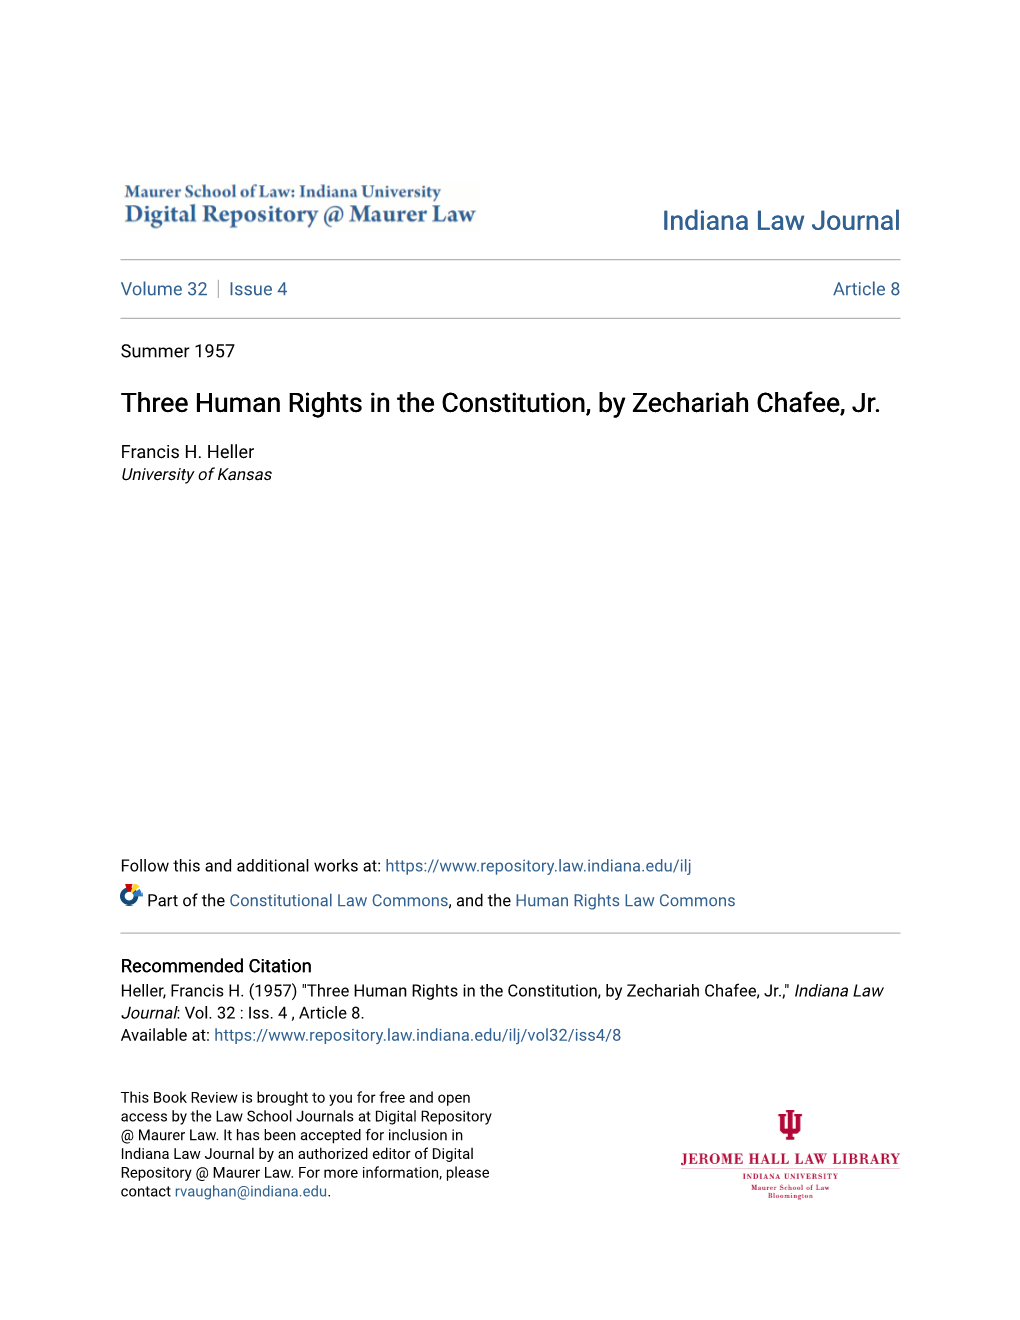 Three Human Rights in the Constitution, by Zechariah Chafee, Jr